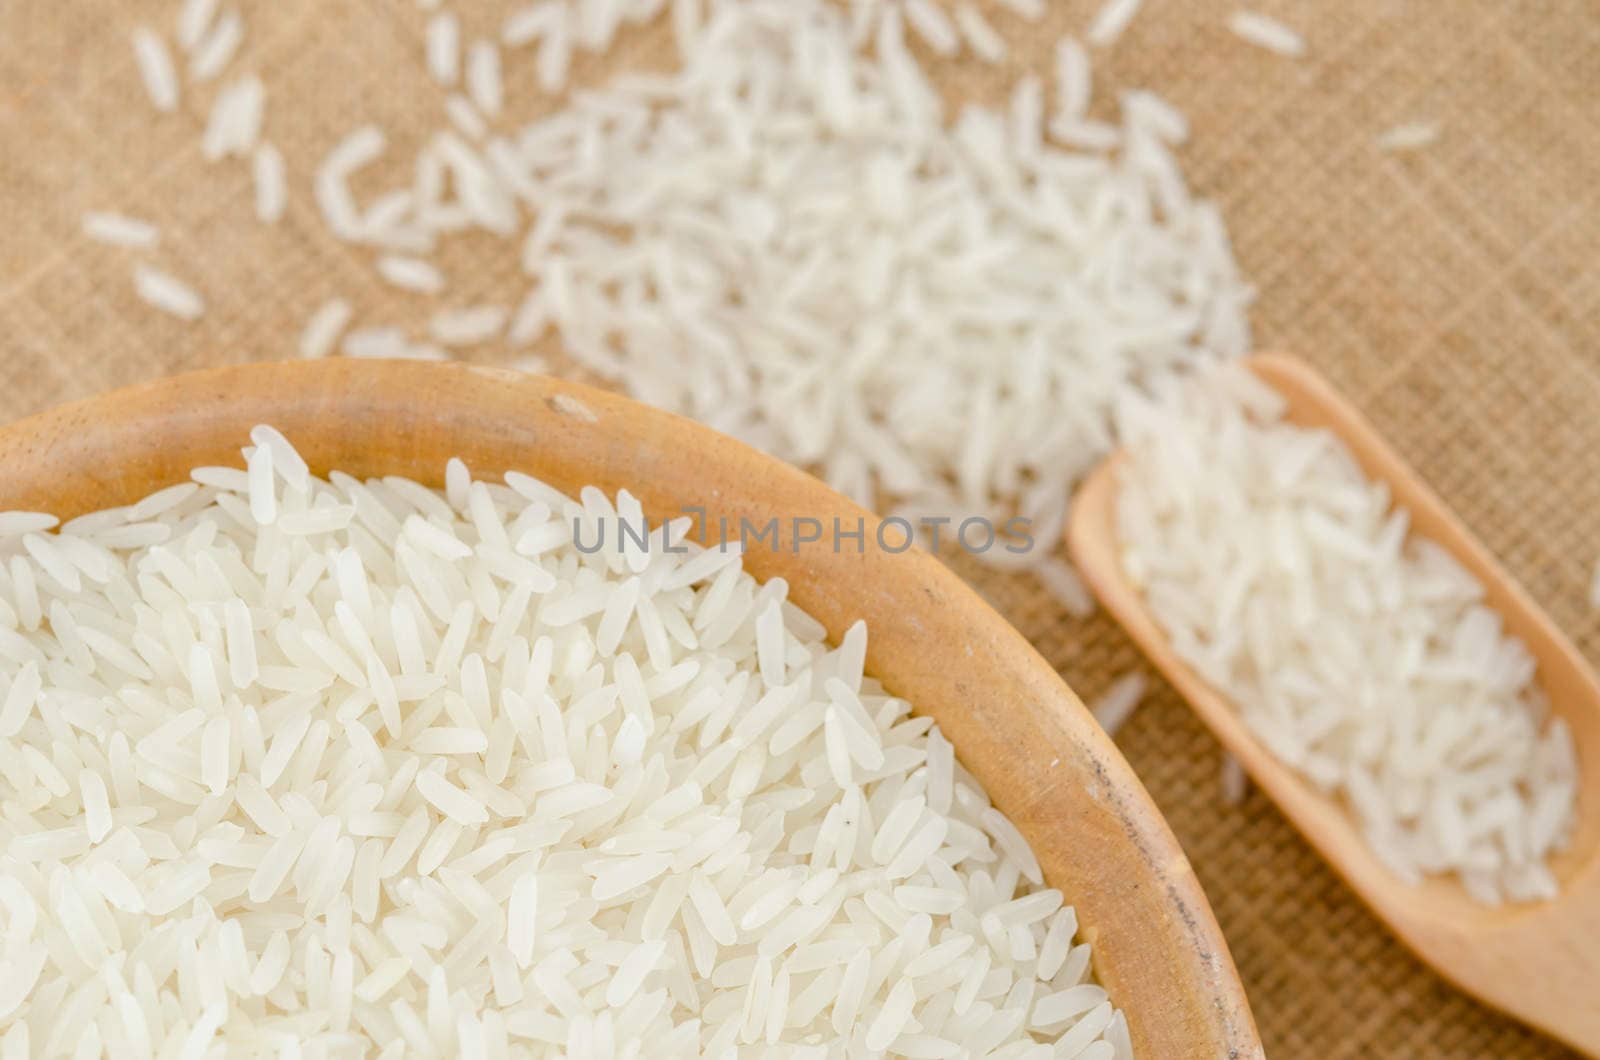 Raw rice in wooden bowl on sack background.